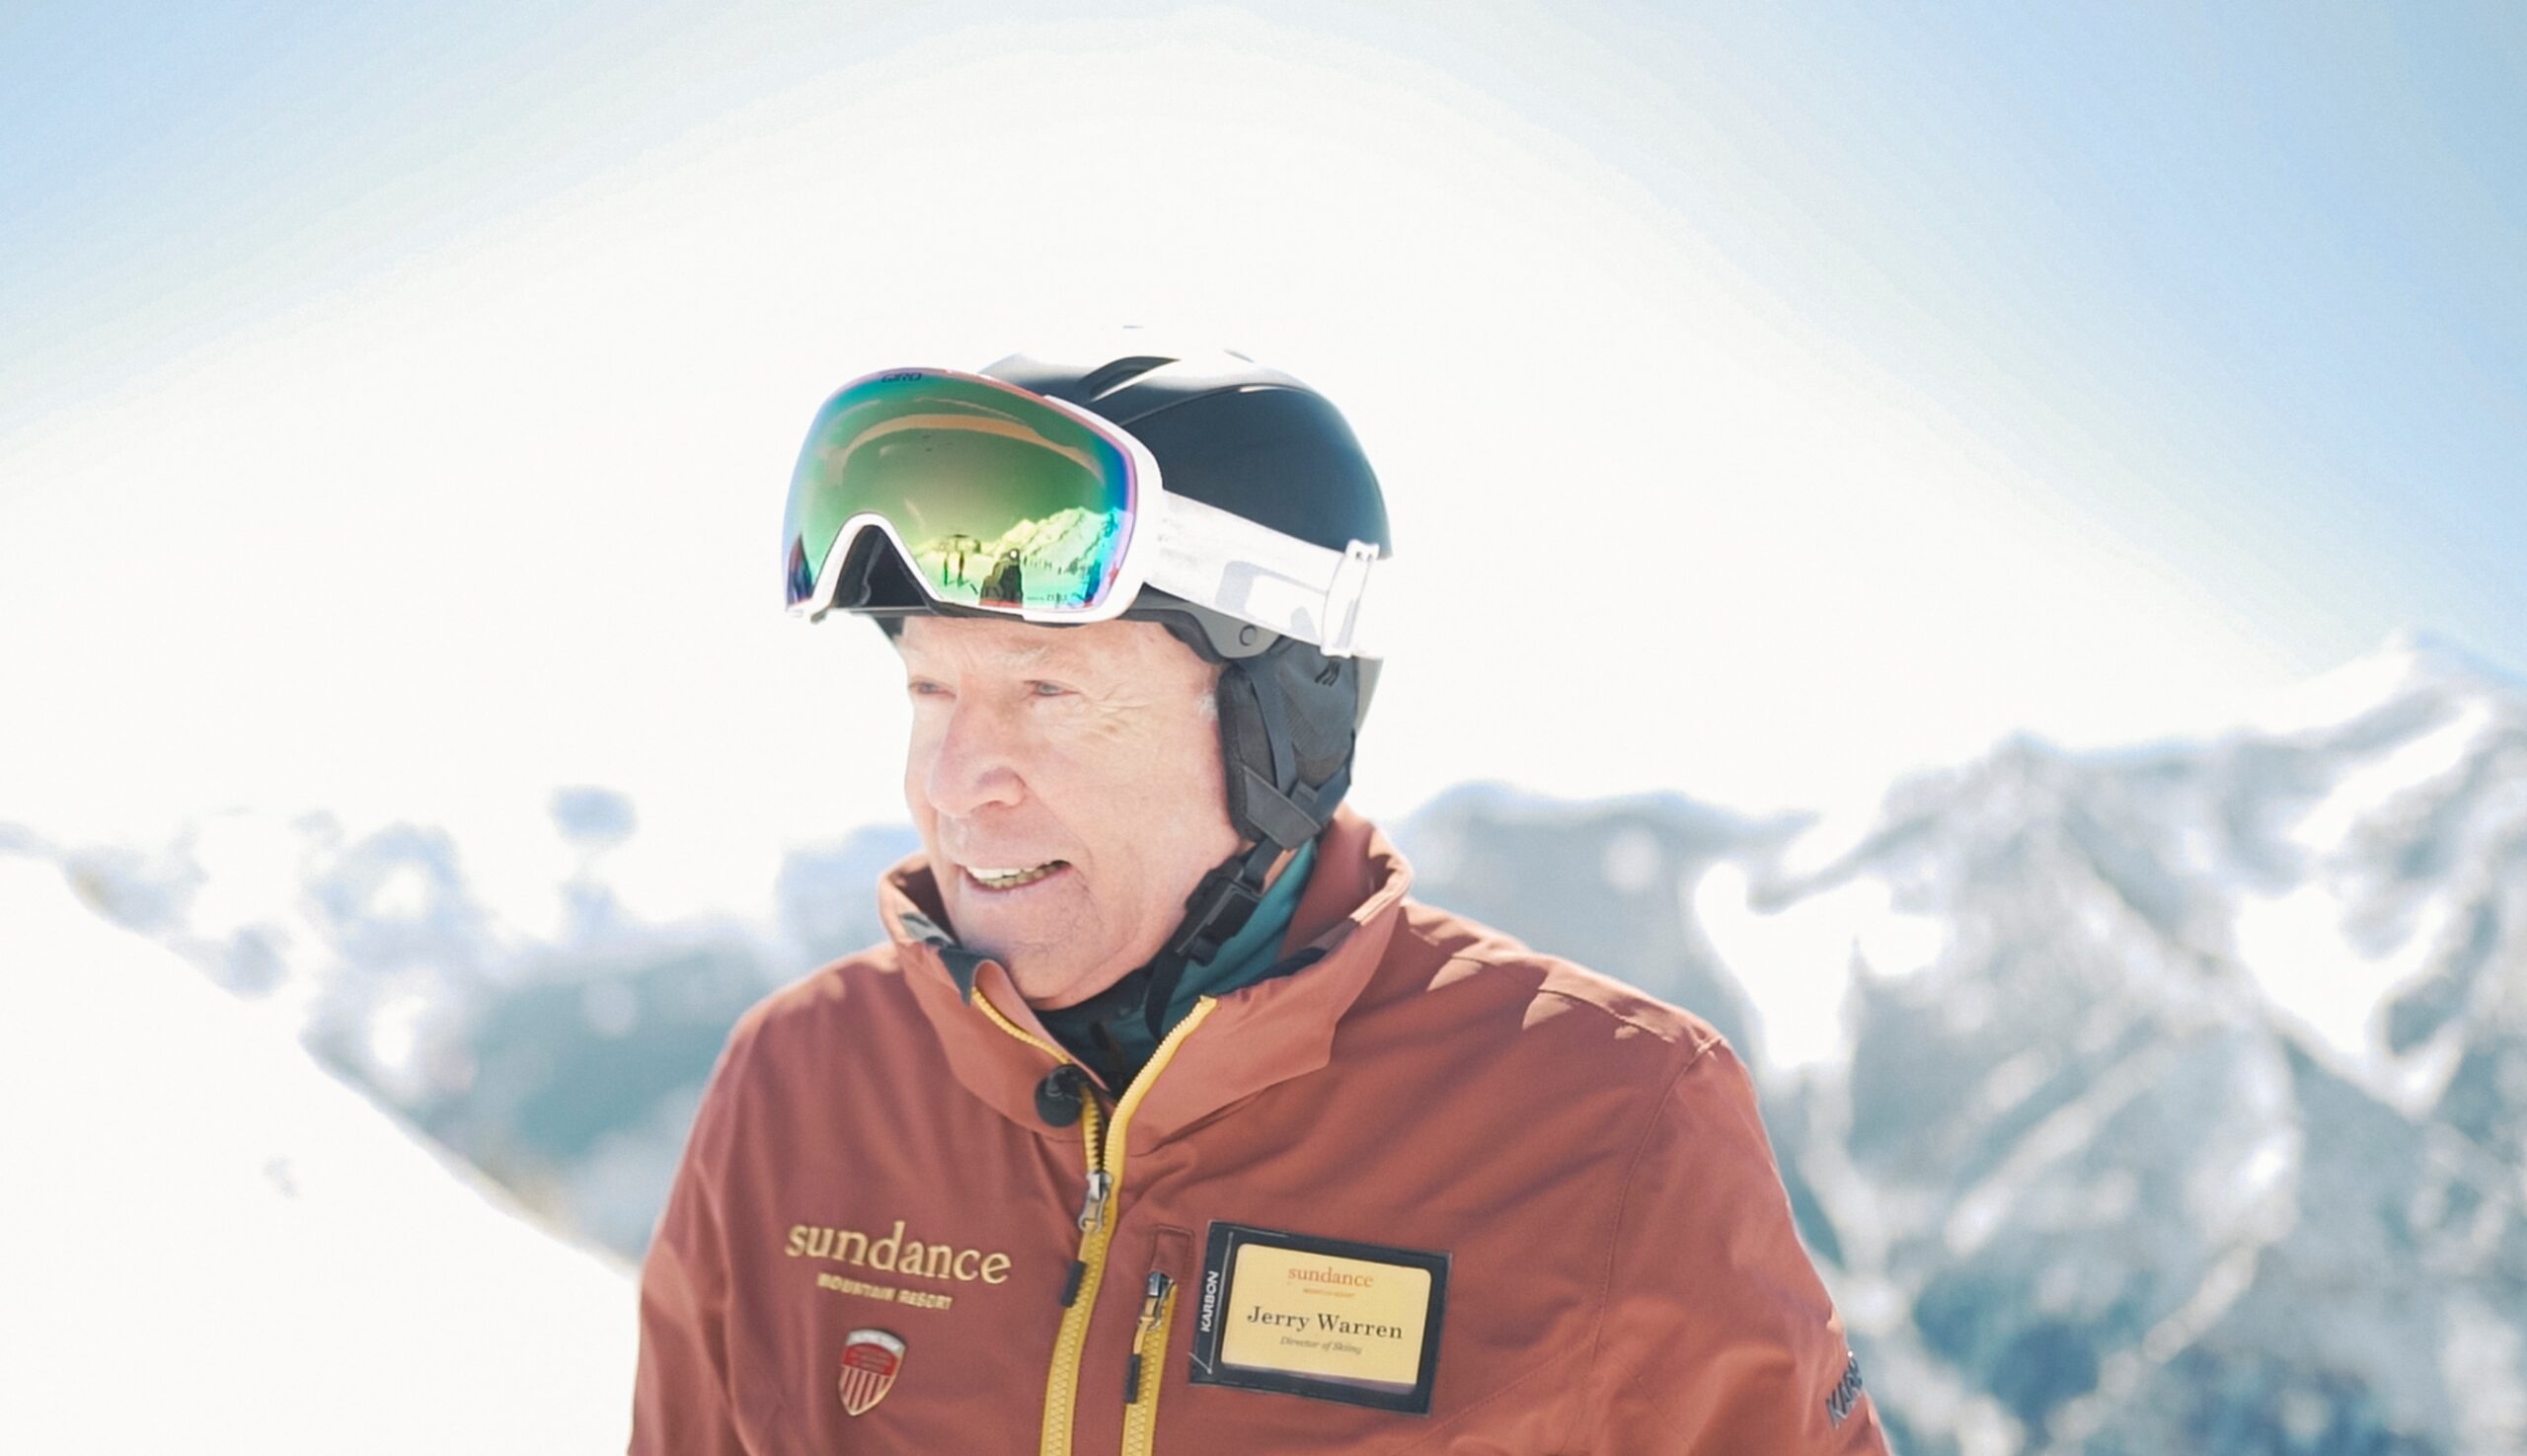 Jerry Warren, the Long-time Director of Mountain Operations at Sundance Resort, is retiring from hi...